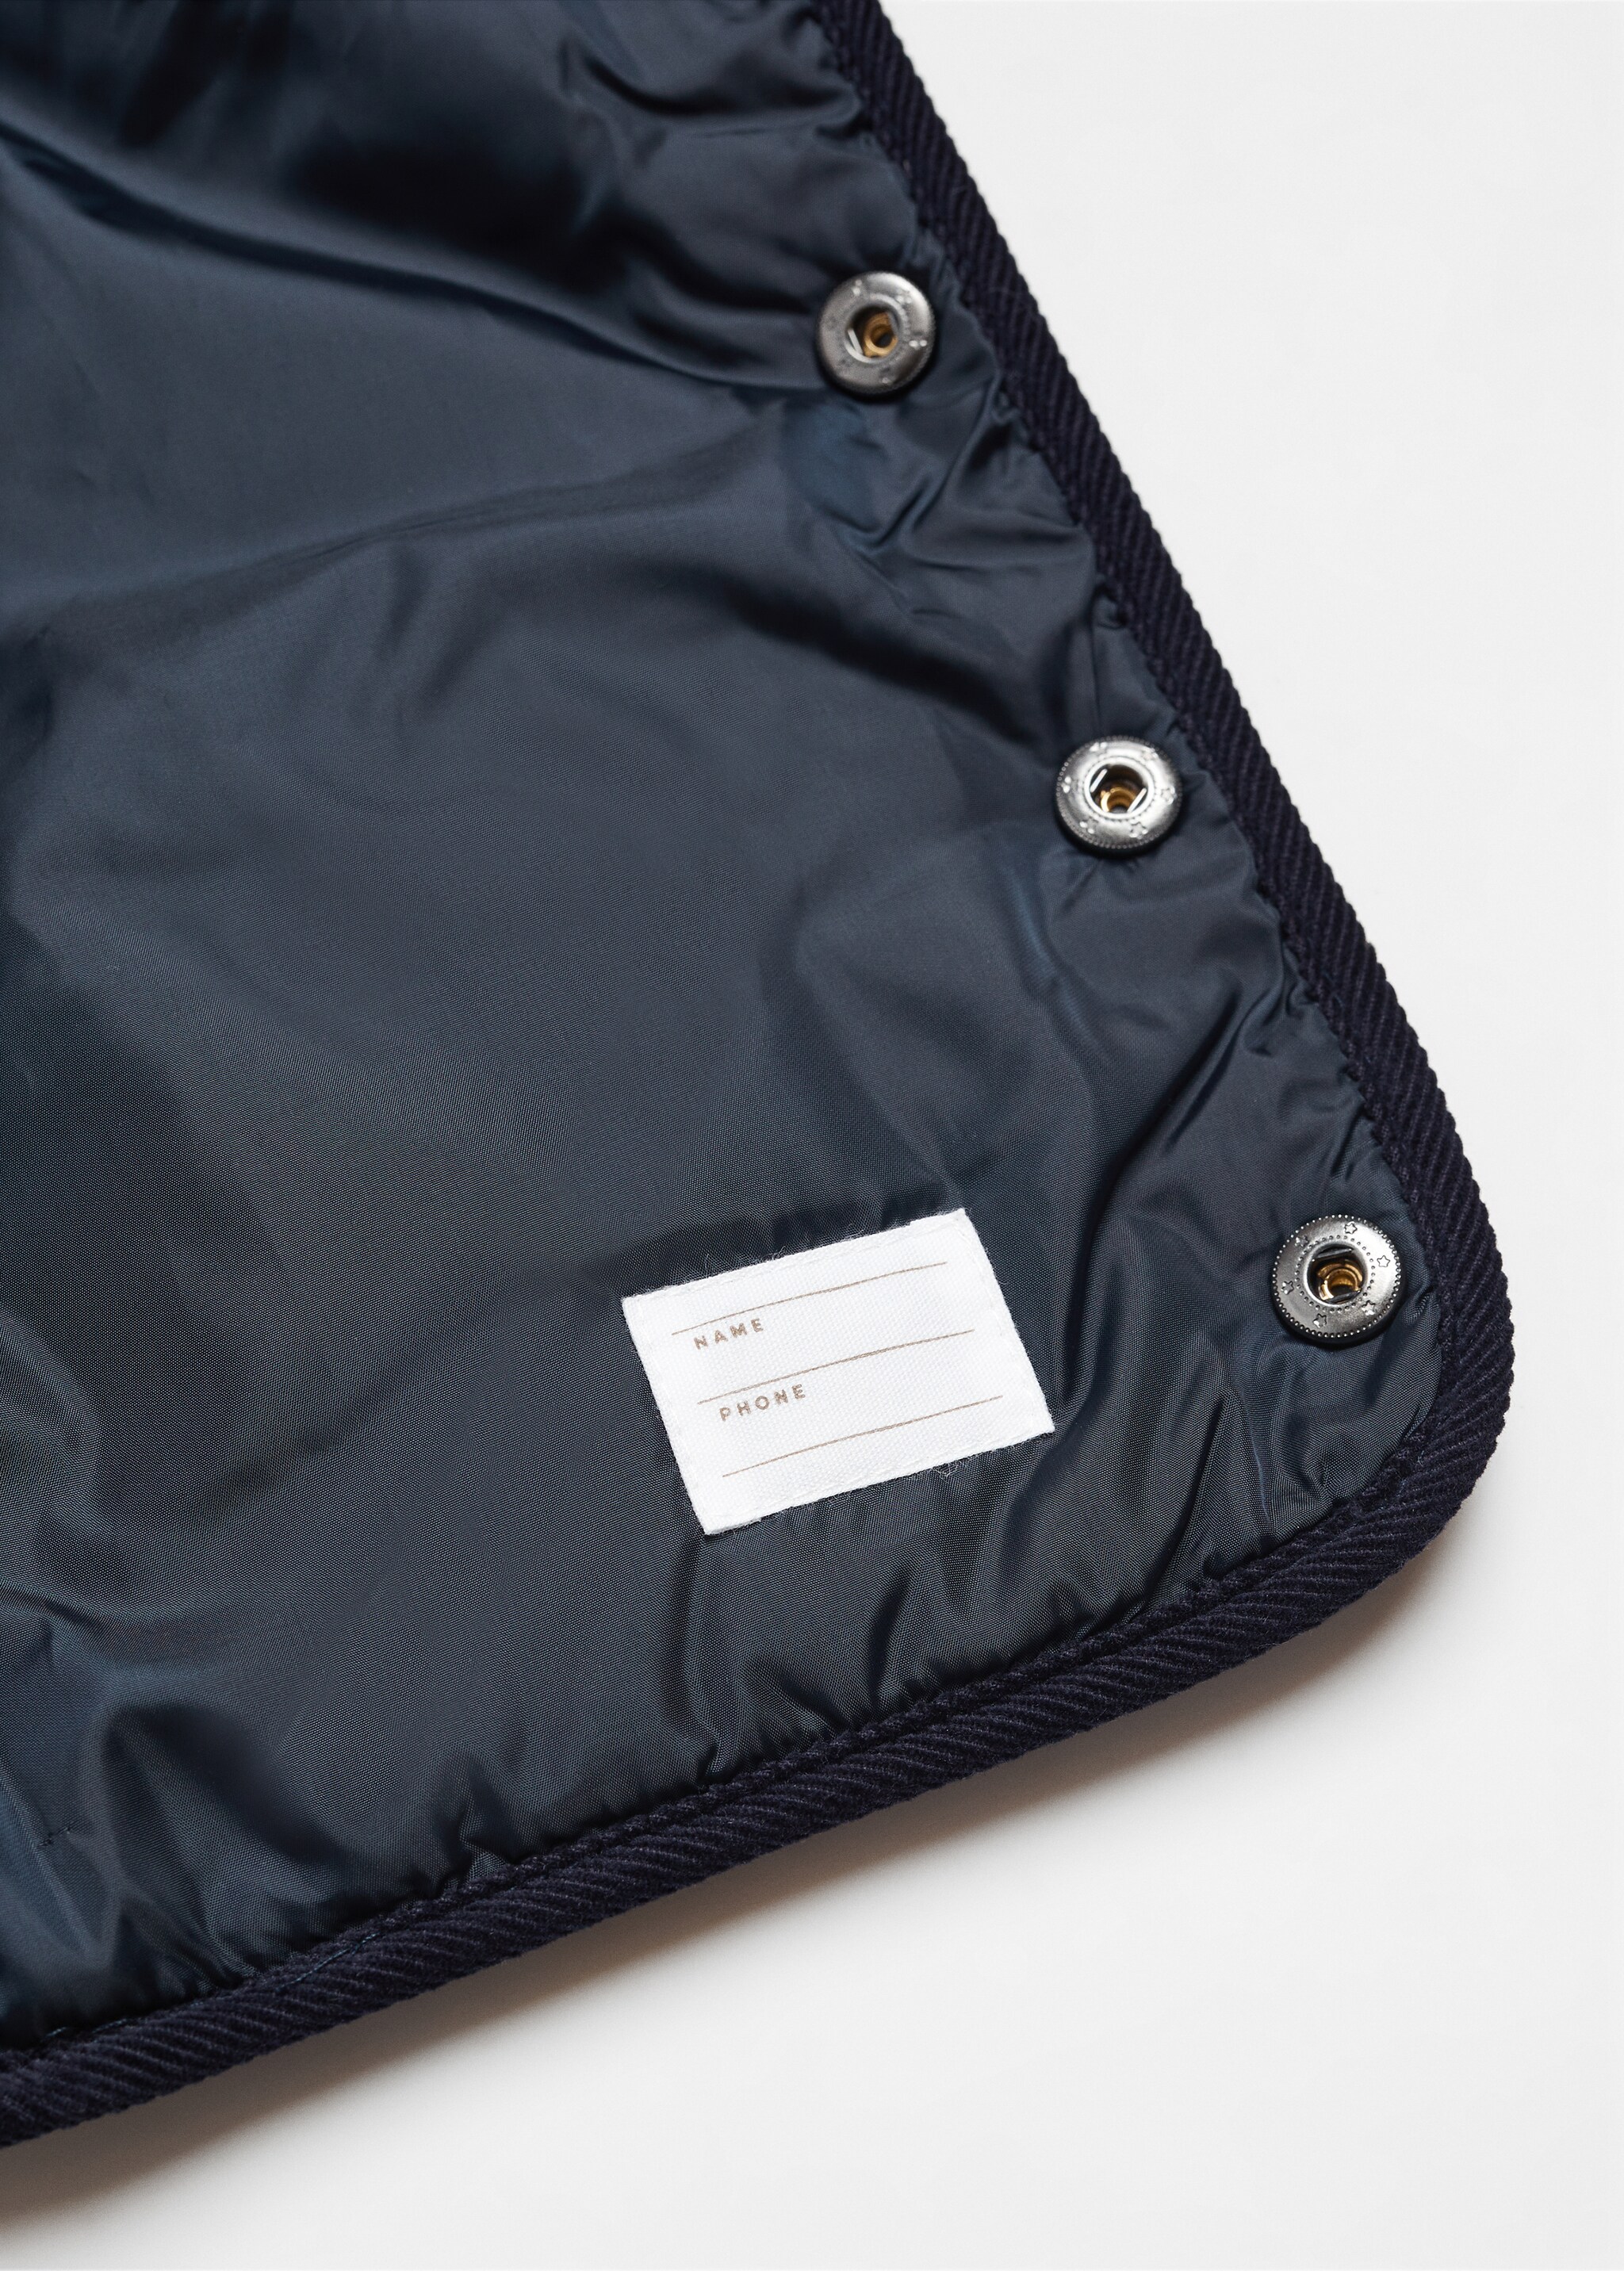 Anorak acolchado rombos - Details of the article 8